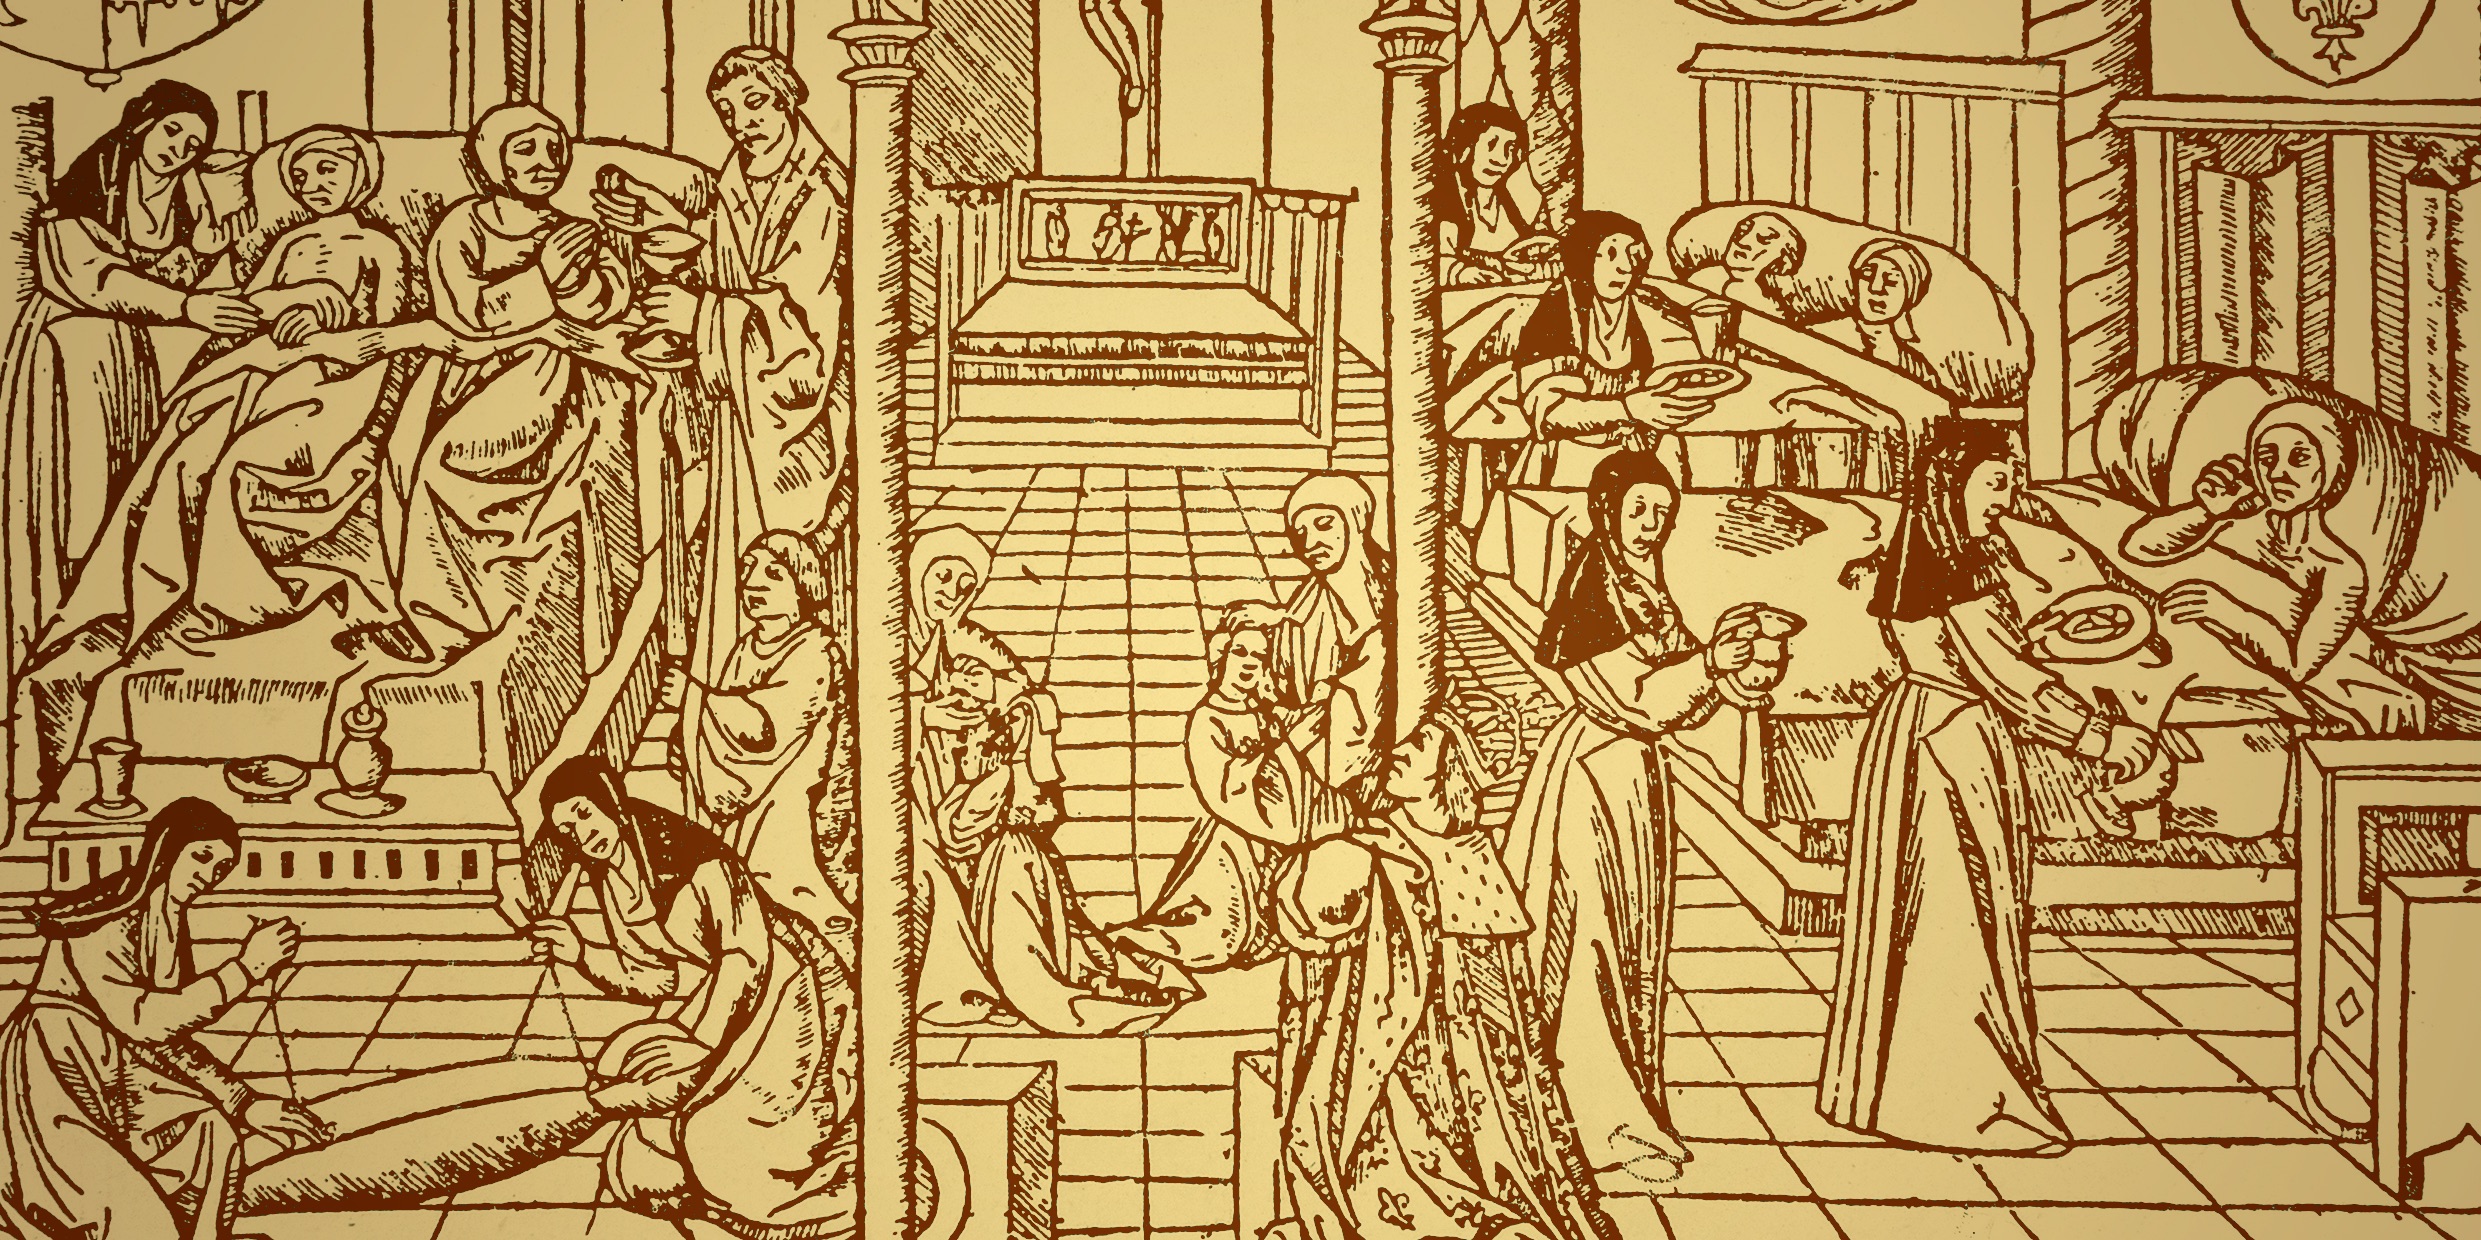 Illustration of medieval hospital ward with patients attended by nuns